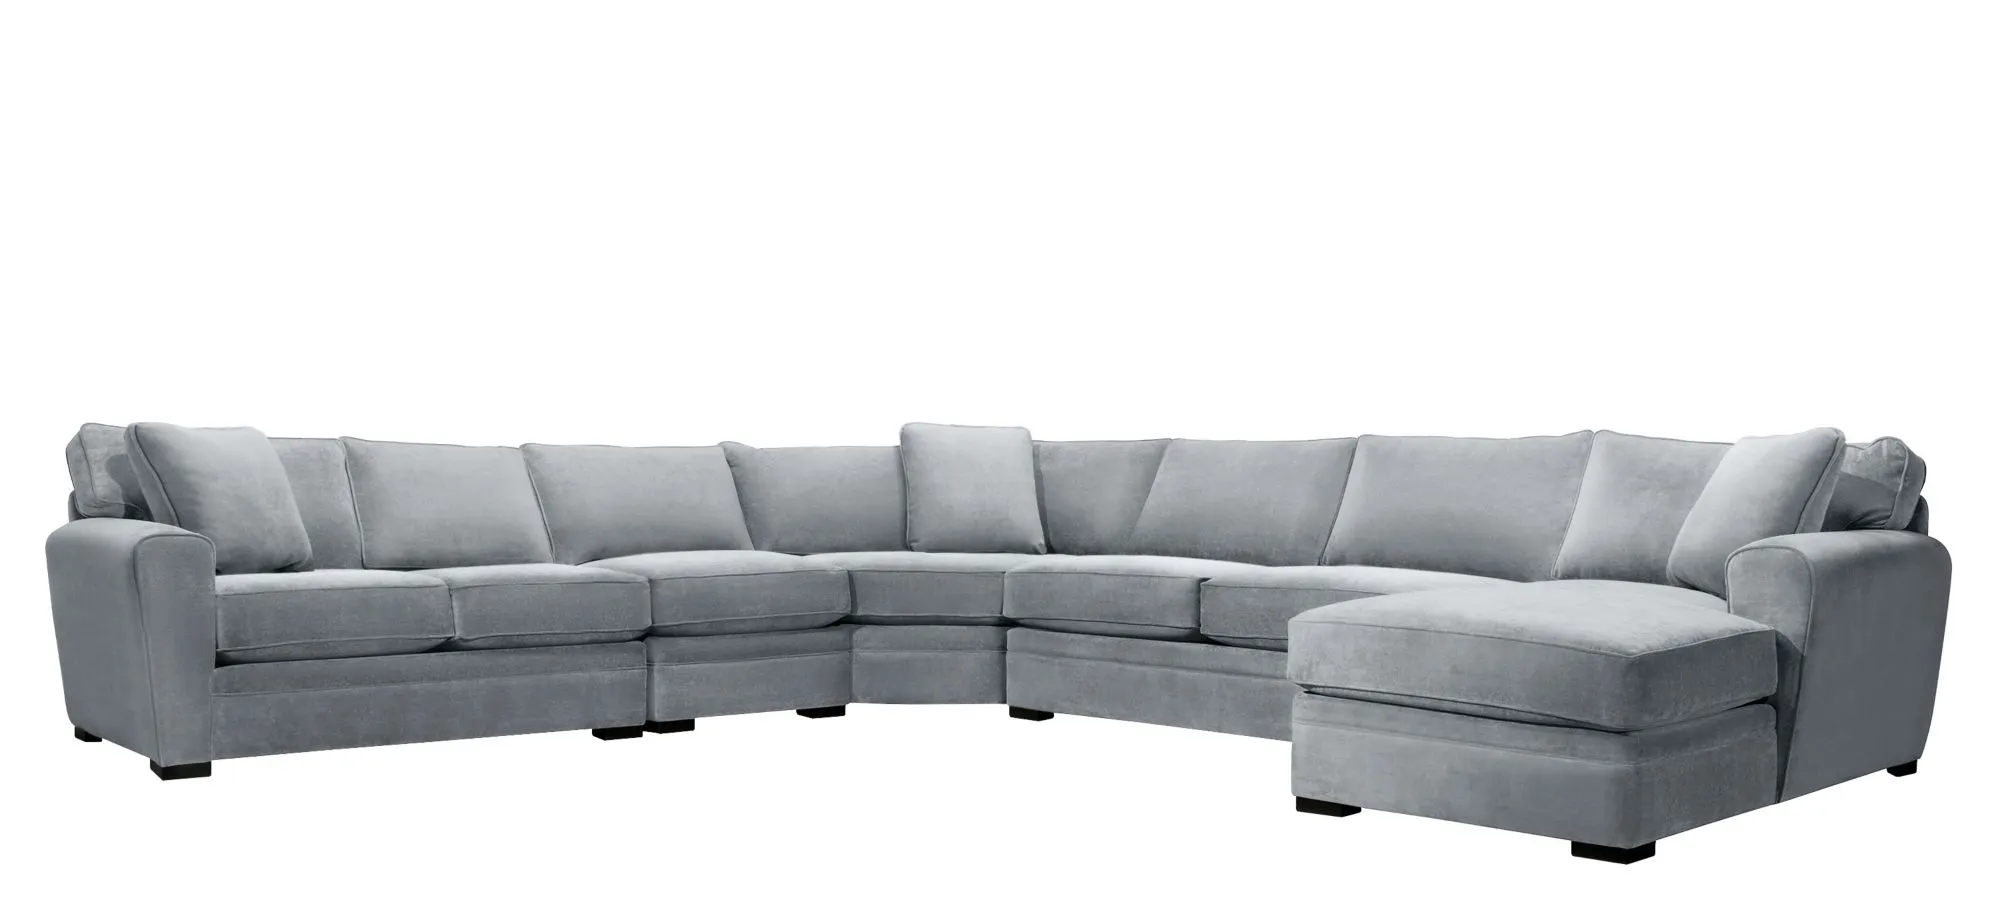 Artemis II 5-pc. Right Hand Facing Sectional Sofa in Gypsy Quarry by Jonathan Louis